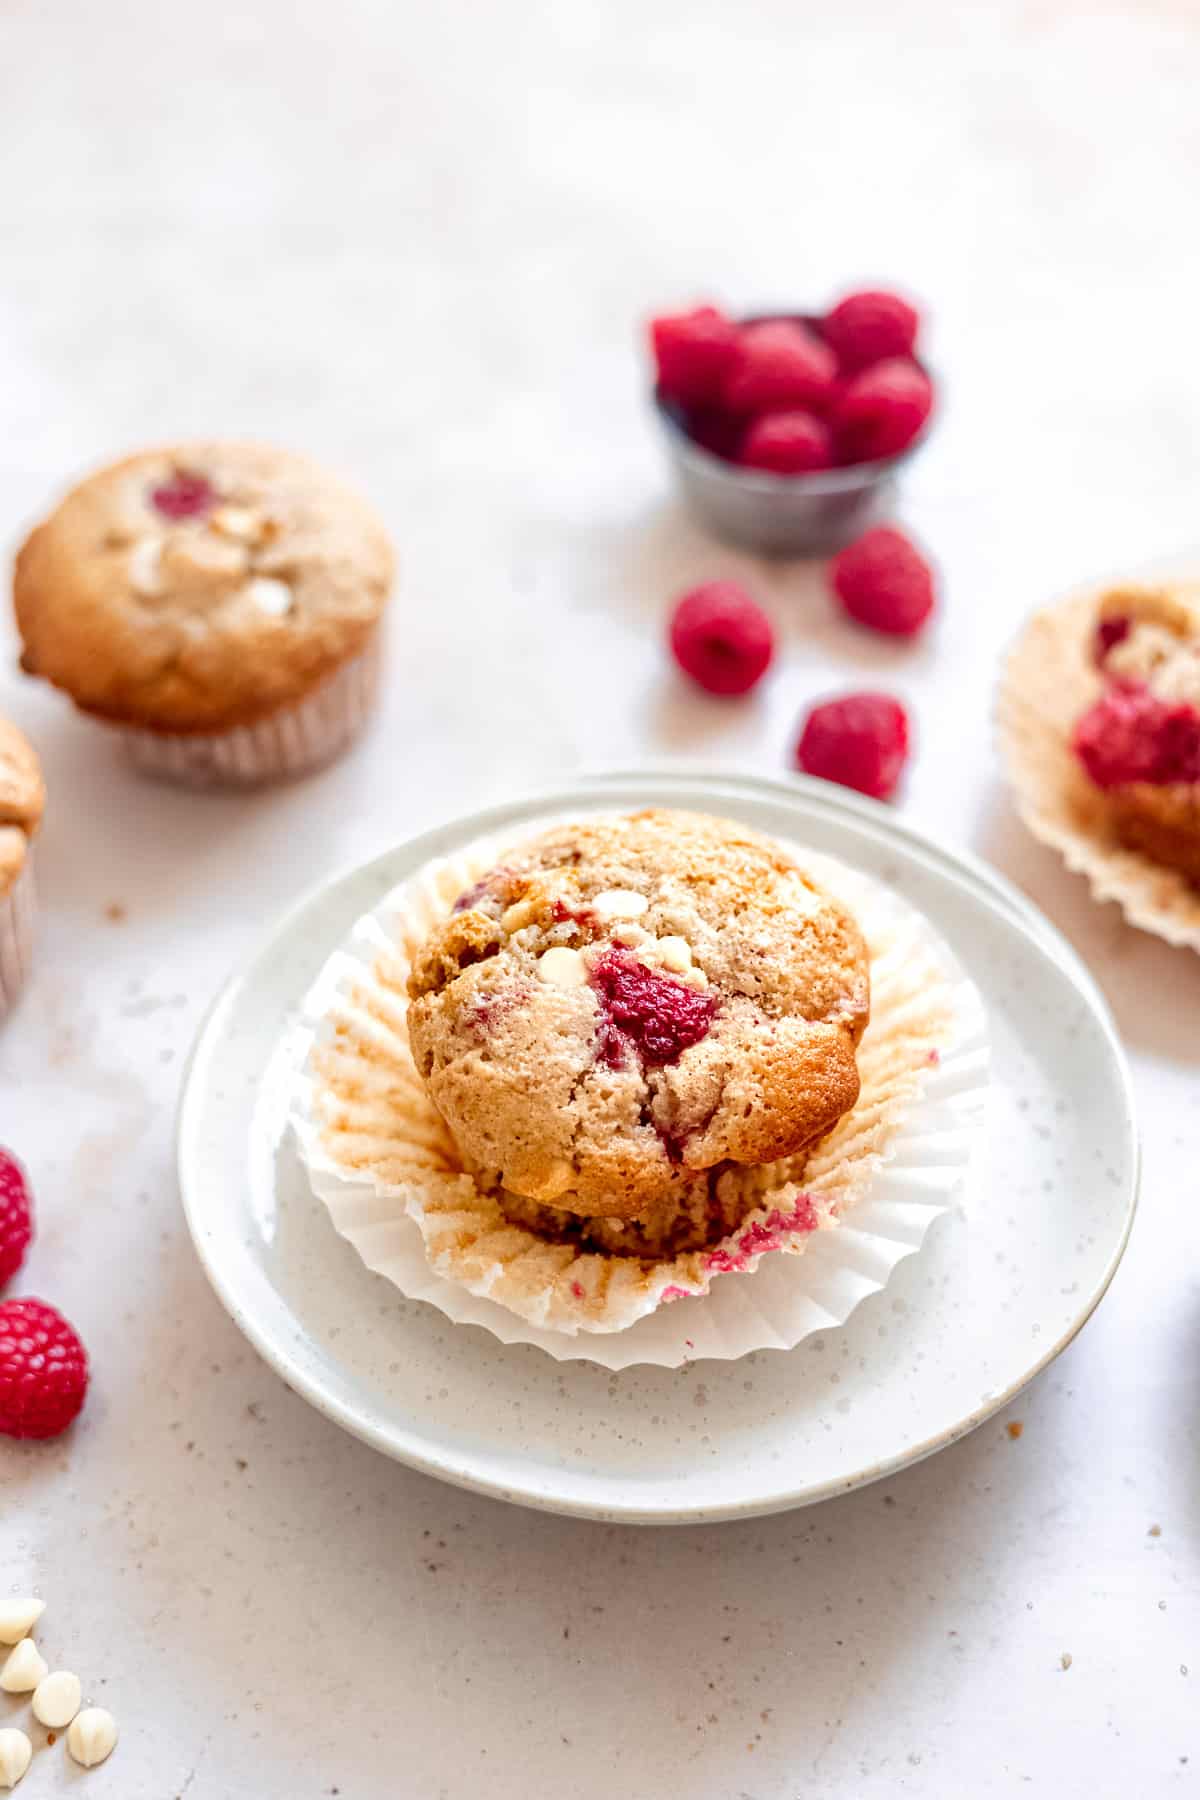 A single white chocolate and raspberry muffin on a white plate.